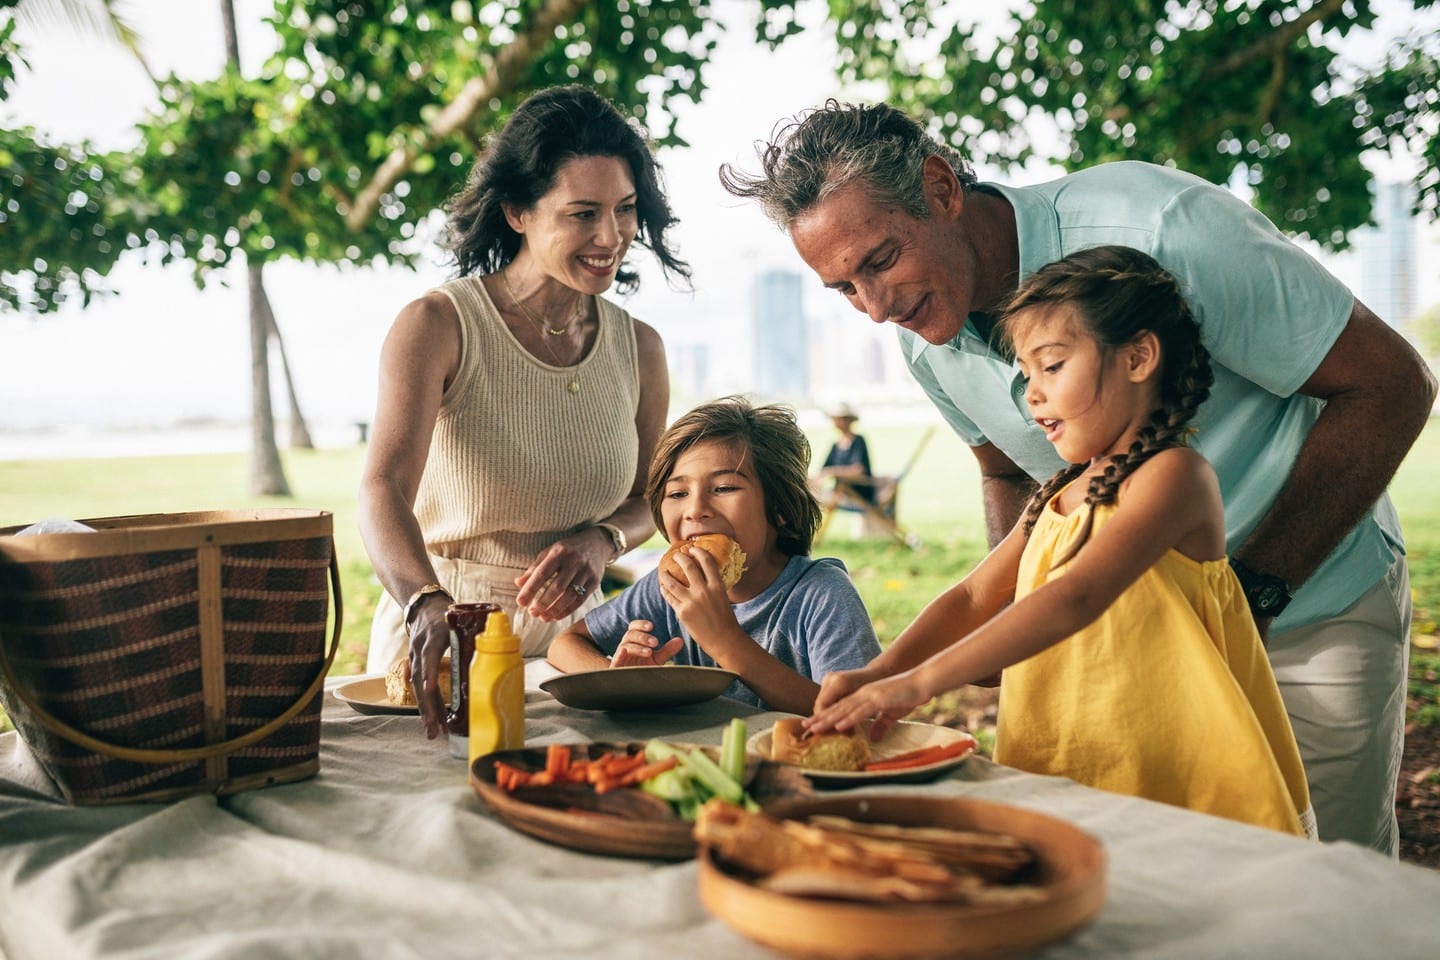 Celebrate dad this Saturday, June 18 from 1pm-4pm at Victoria Ward Park. Enjoy larger-than-life games, sliders and desserts from @dnbhonolulu (while supplies last) and compete to win a gift card to The Golf Sim powered by @rogerdunngolfhawaii. Click the link in our bio to learn more!